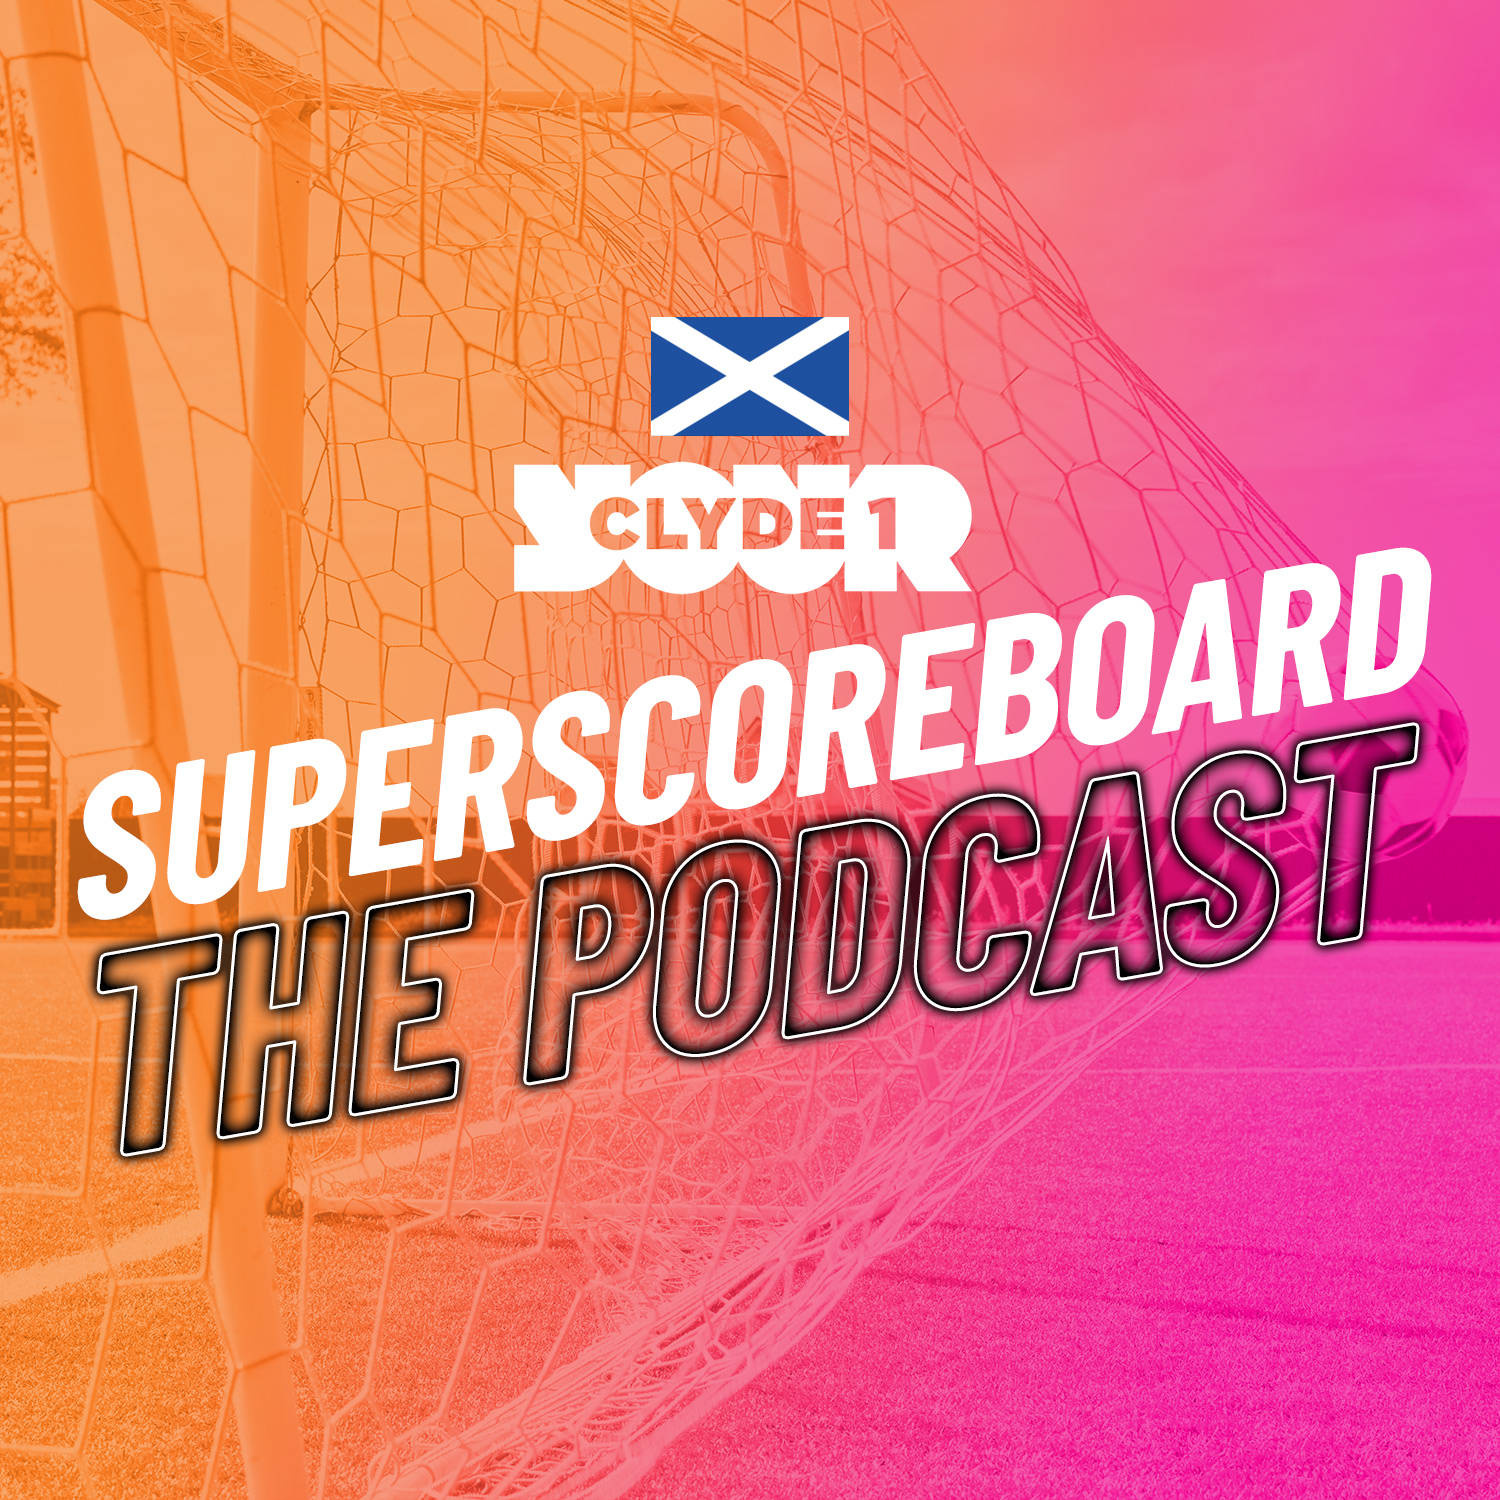 Tuesday 6th February Clyde 1 Superscoreboard